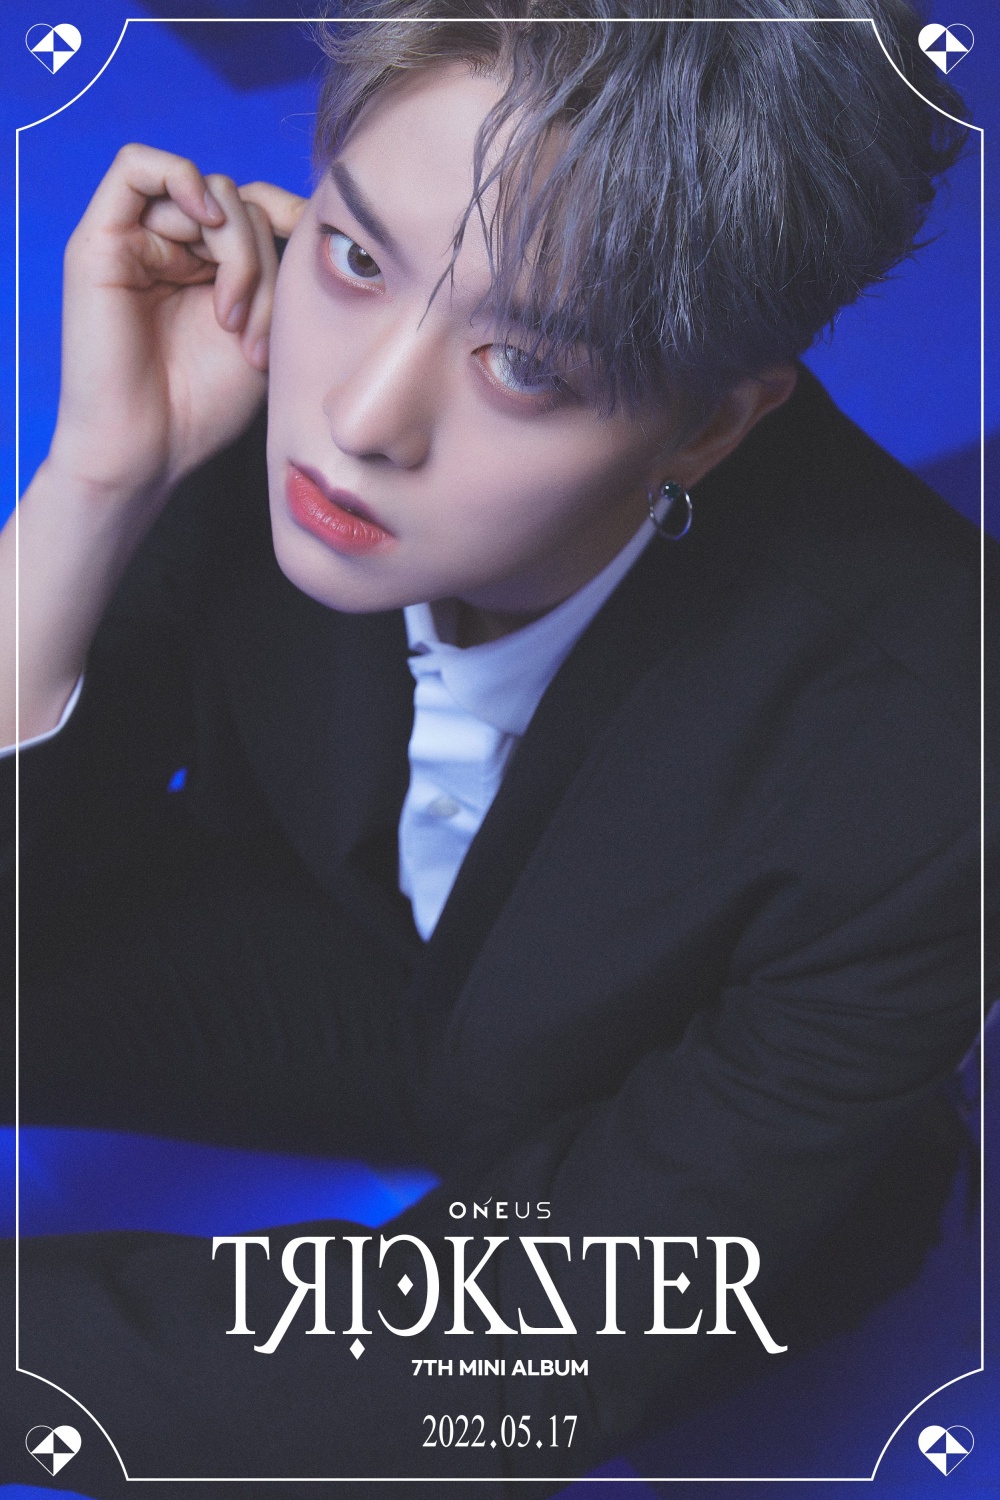 ONEUS, 'TRICKSTER' Personal Concept Photo Released